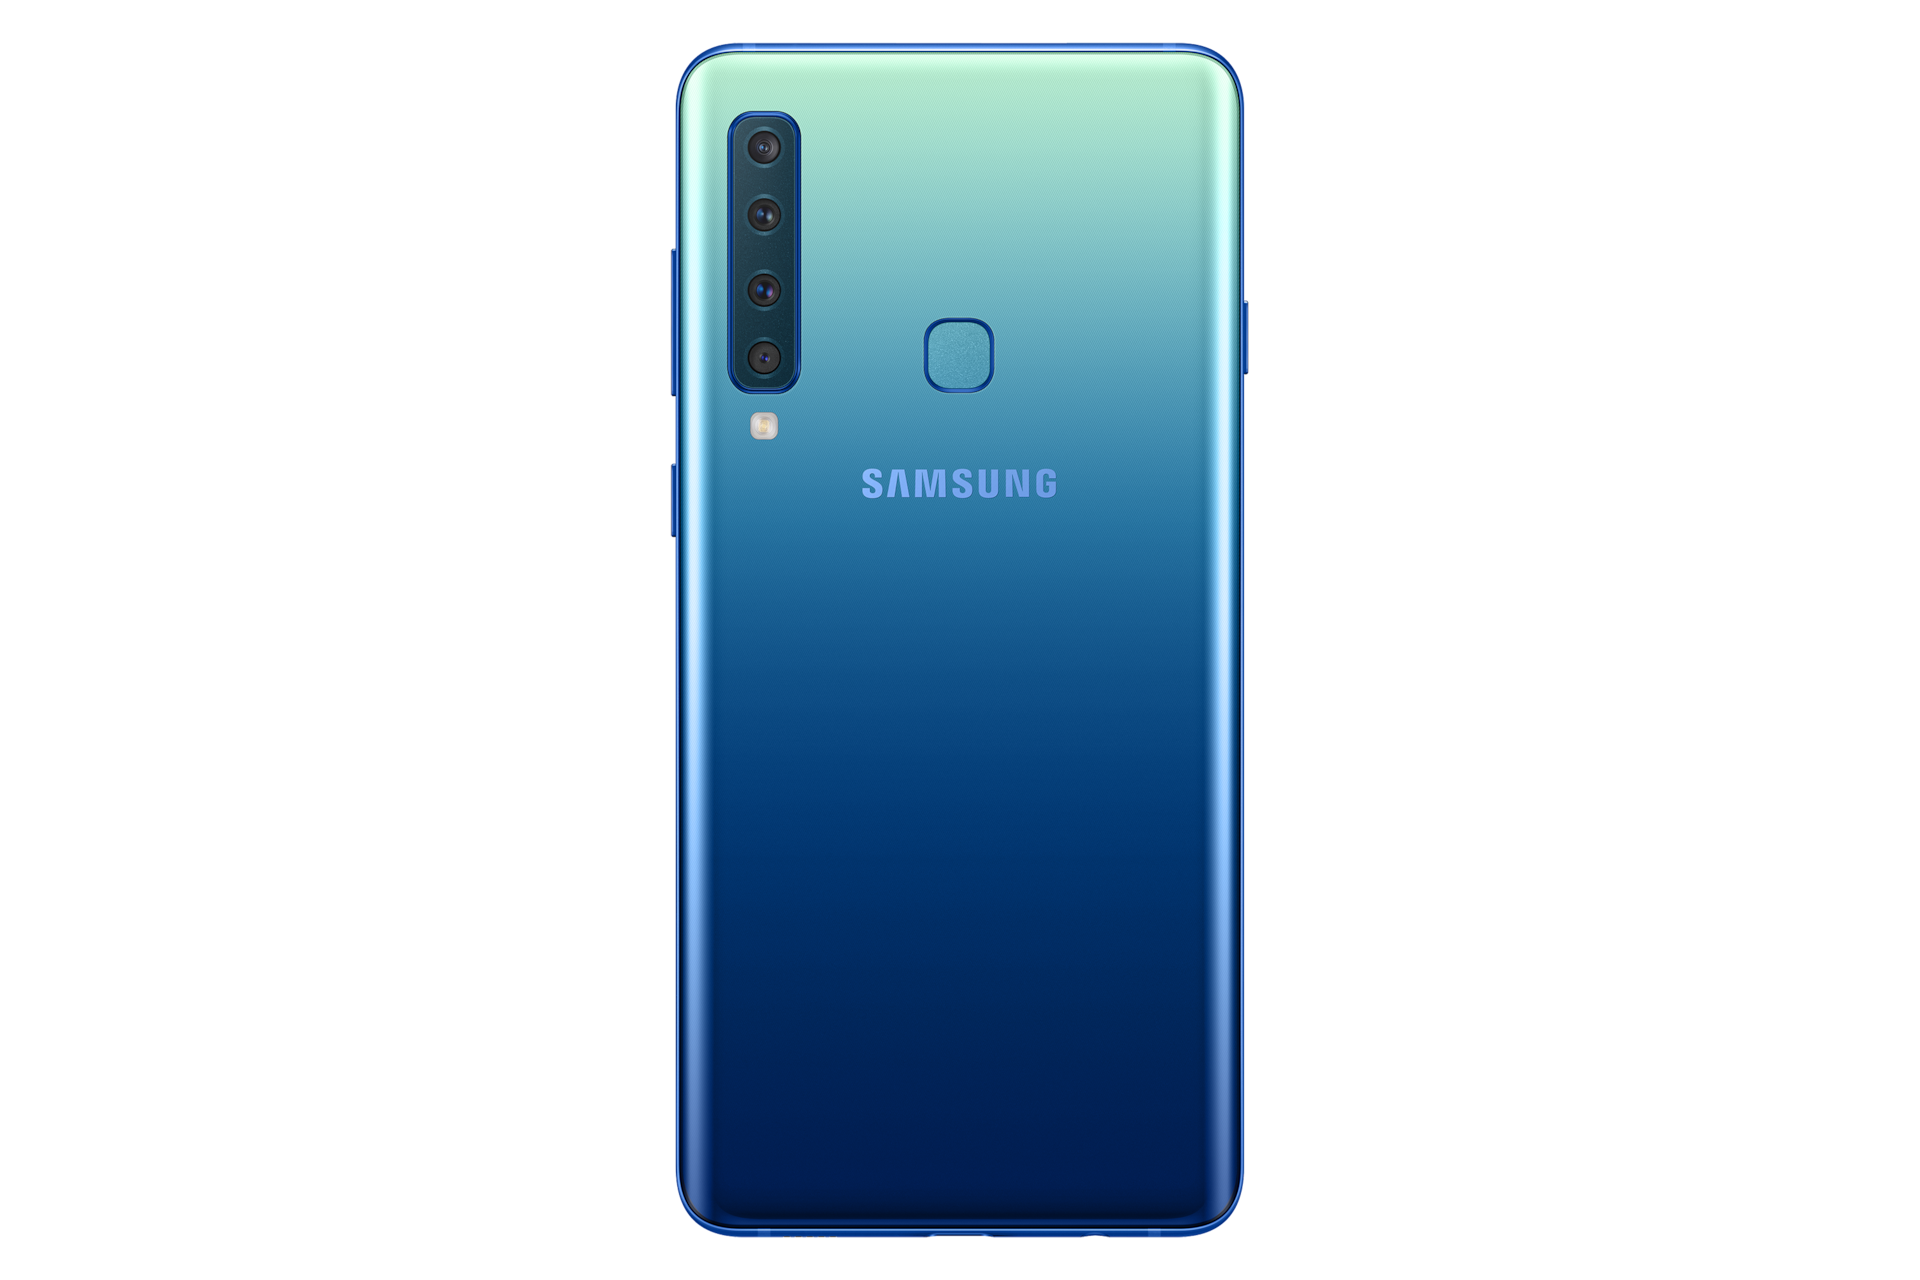 Samsung Galaxy A9 (2018) Spécifications techniques